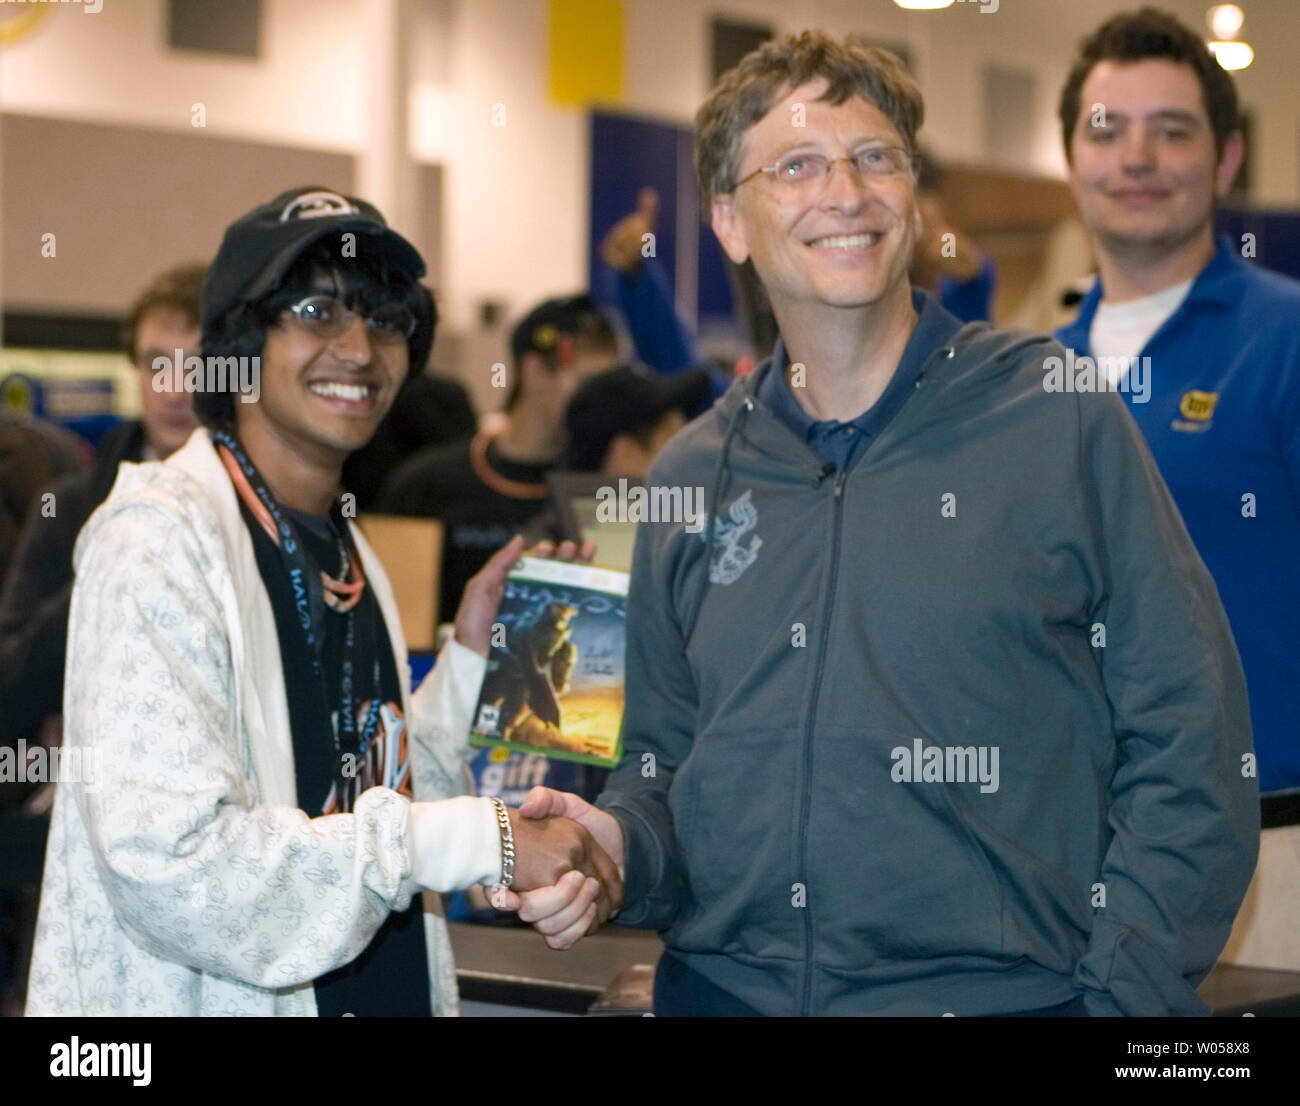 Ritesh Davis, (L) shakes hands with Bill Gates, founder of Microsoft, during the global release of Halo3 at Best Buy in Bellevue, Washington on September 25, 2007